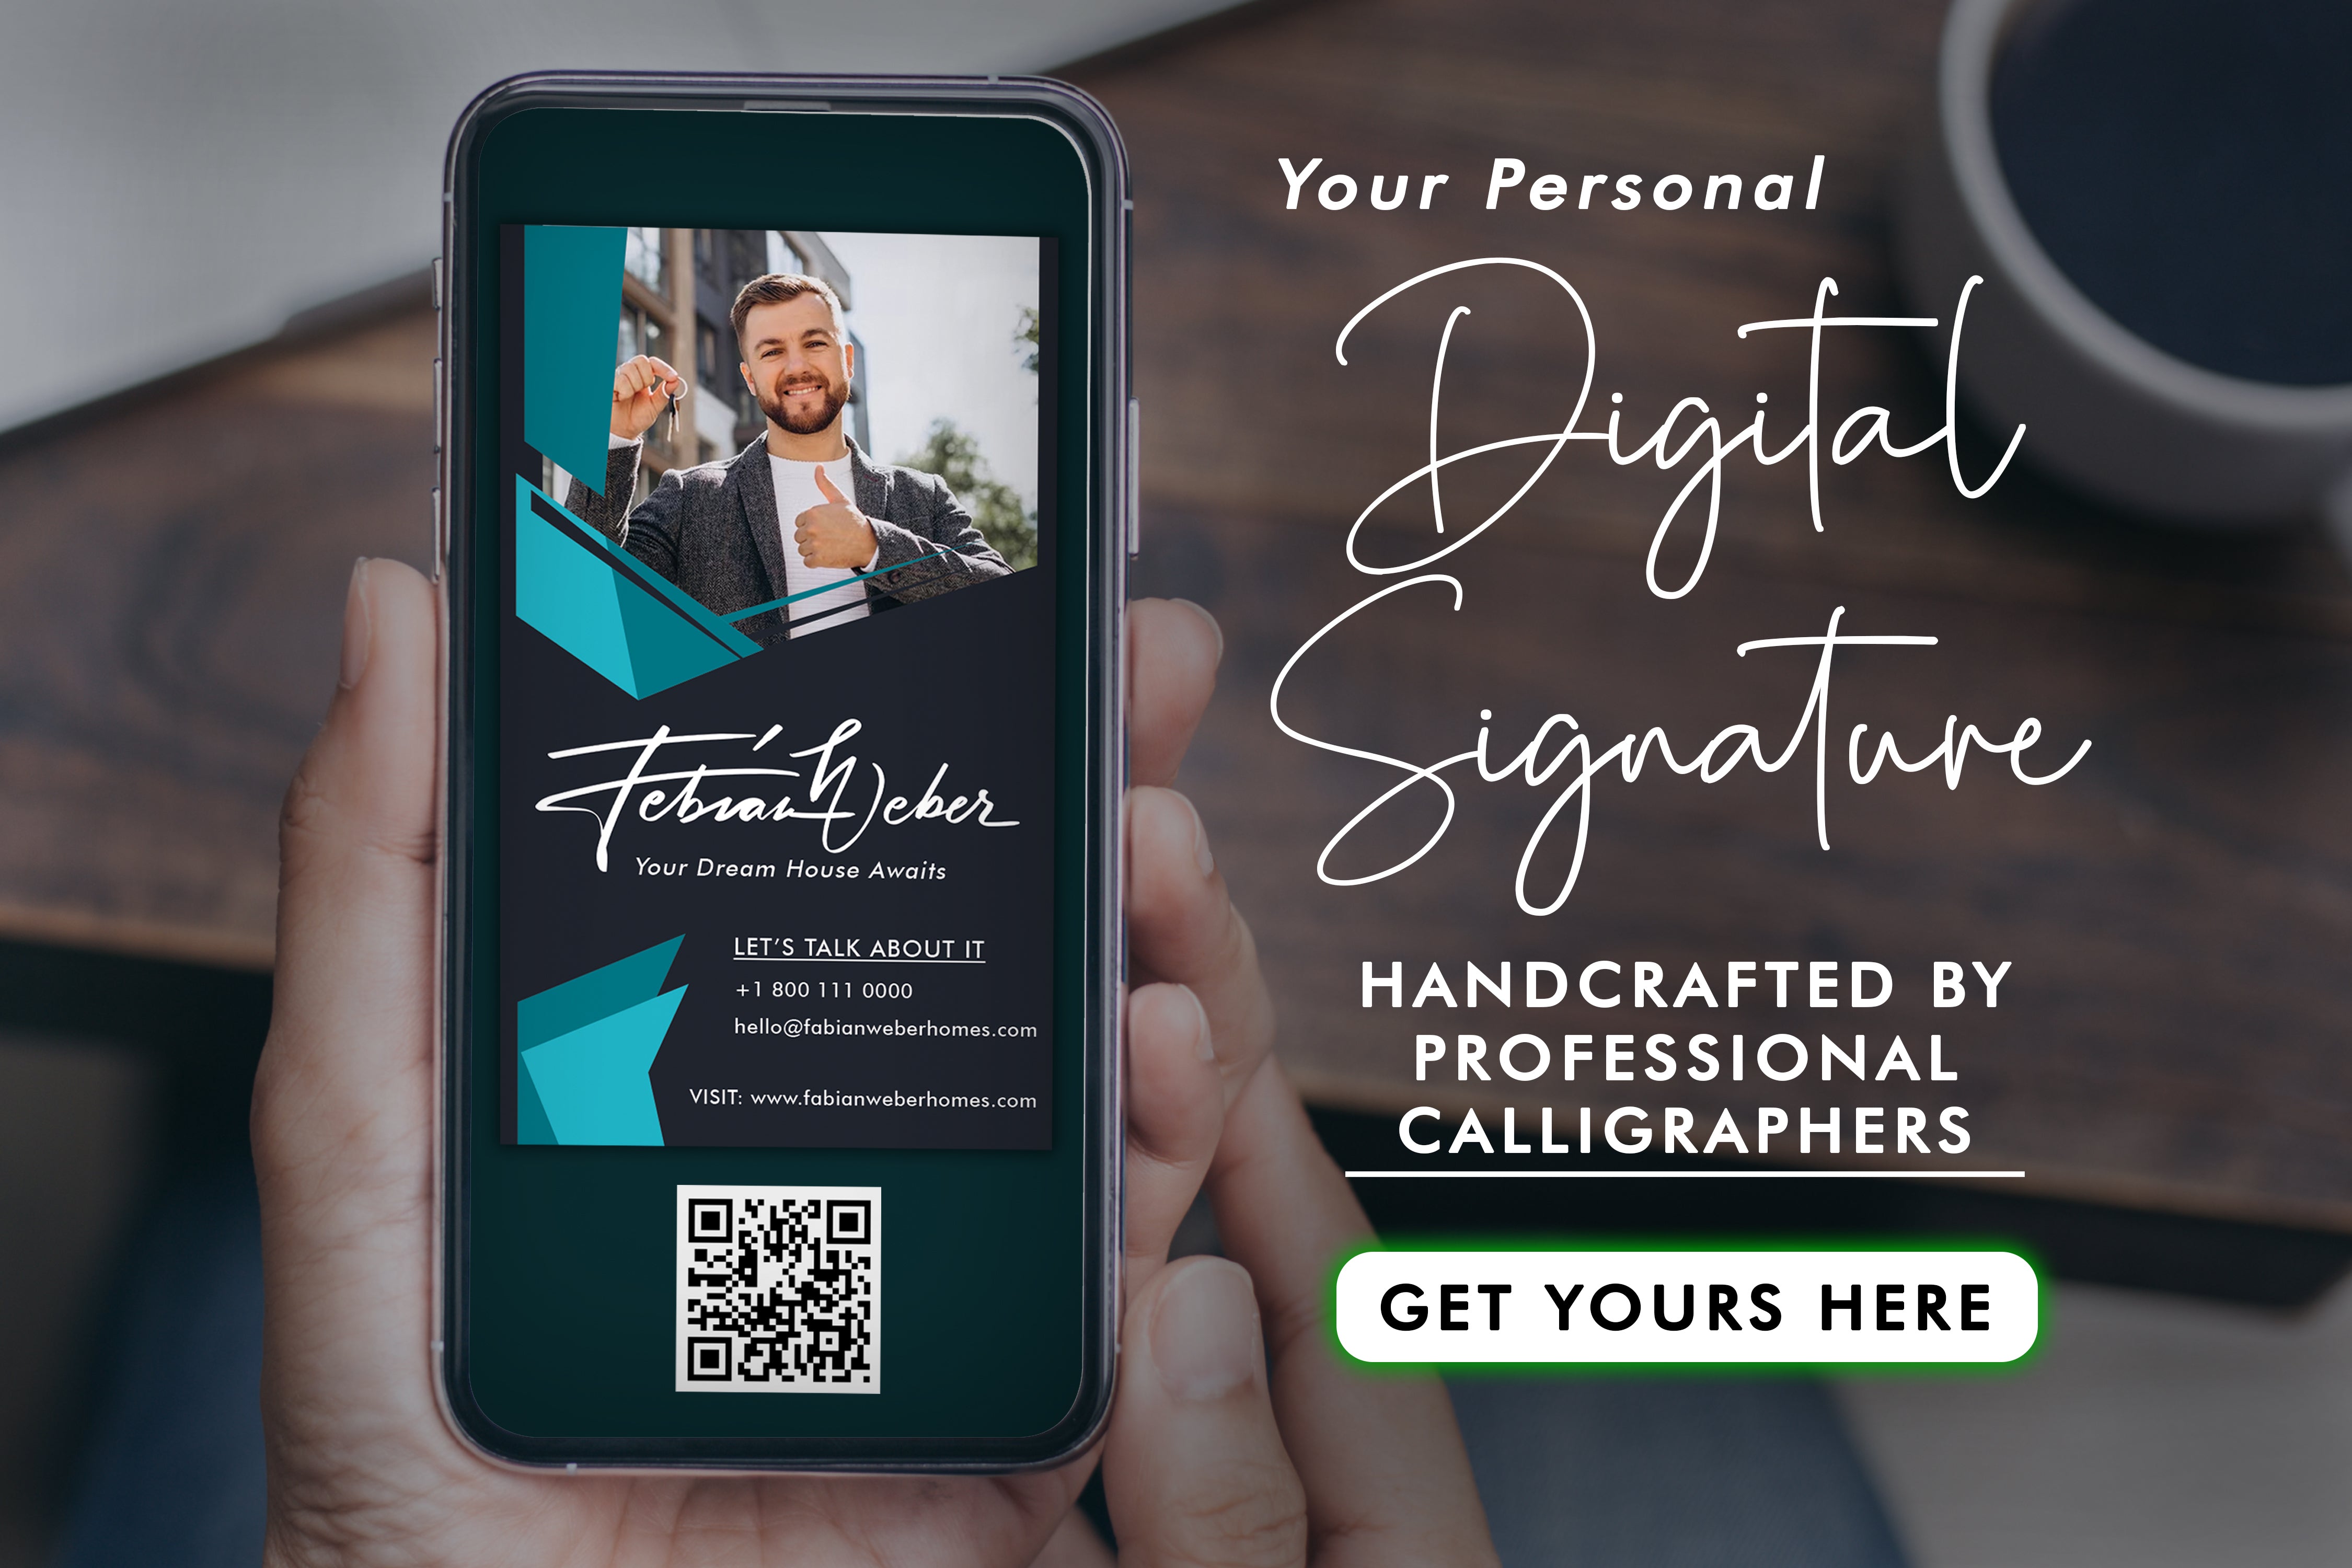 Enhance branding with a versatile digital stamp that provides authenticity and customization. Find out how to elevate your business image.